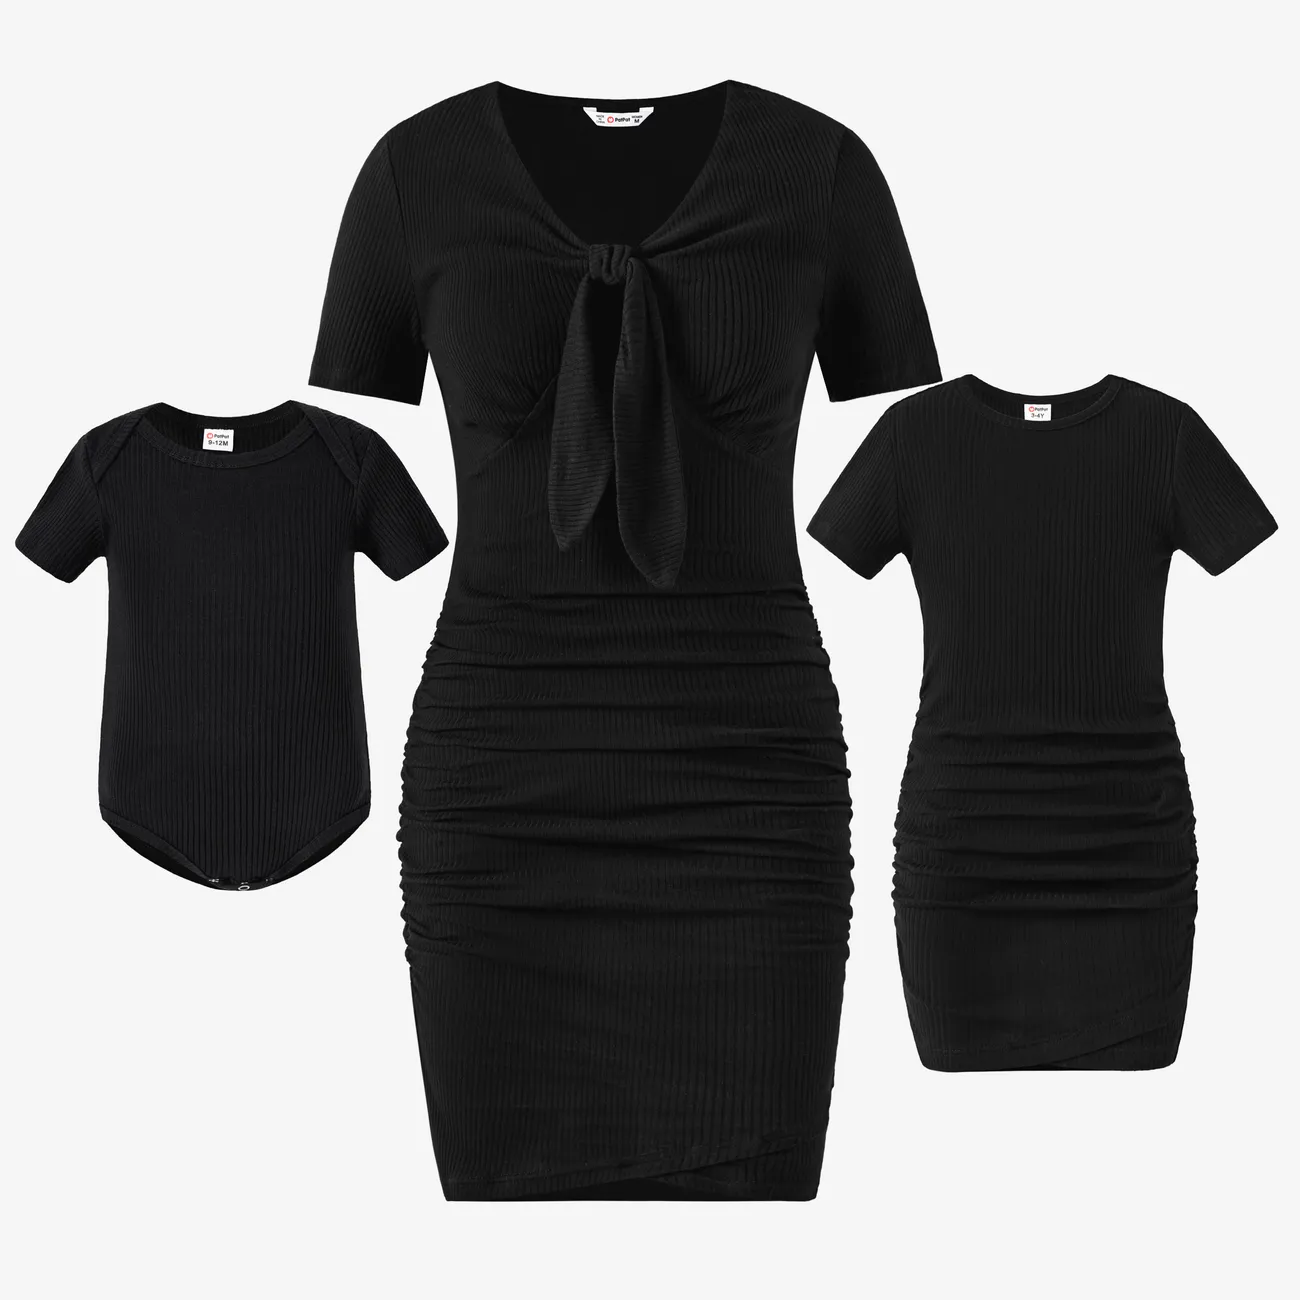 Mommy and Me Short-Sleeve Black Ribbed Tie Neck Ruched Bodycon Dress Black big image 1